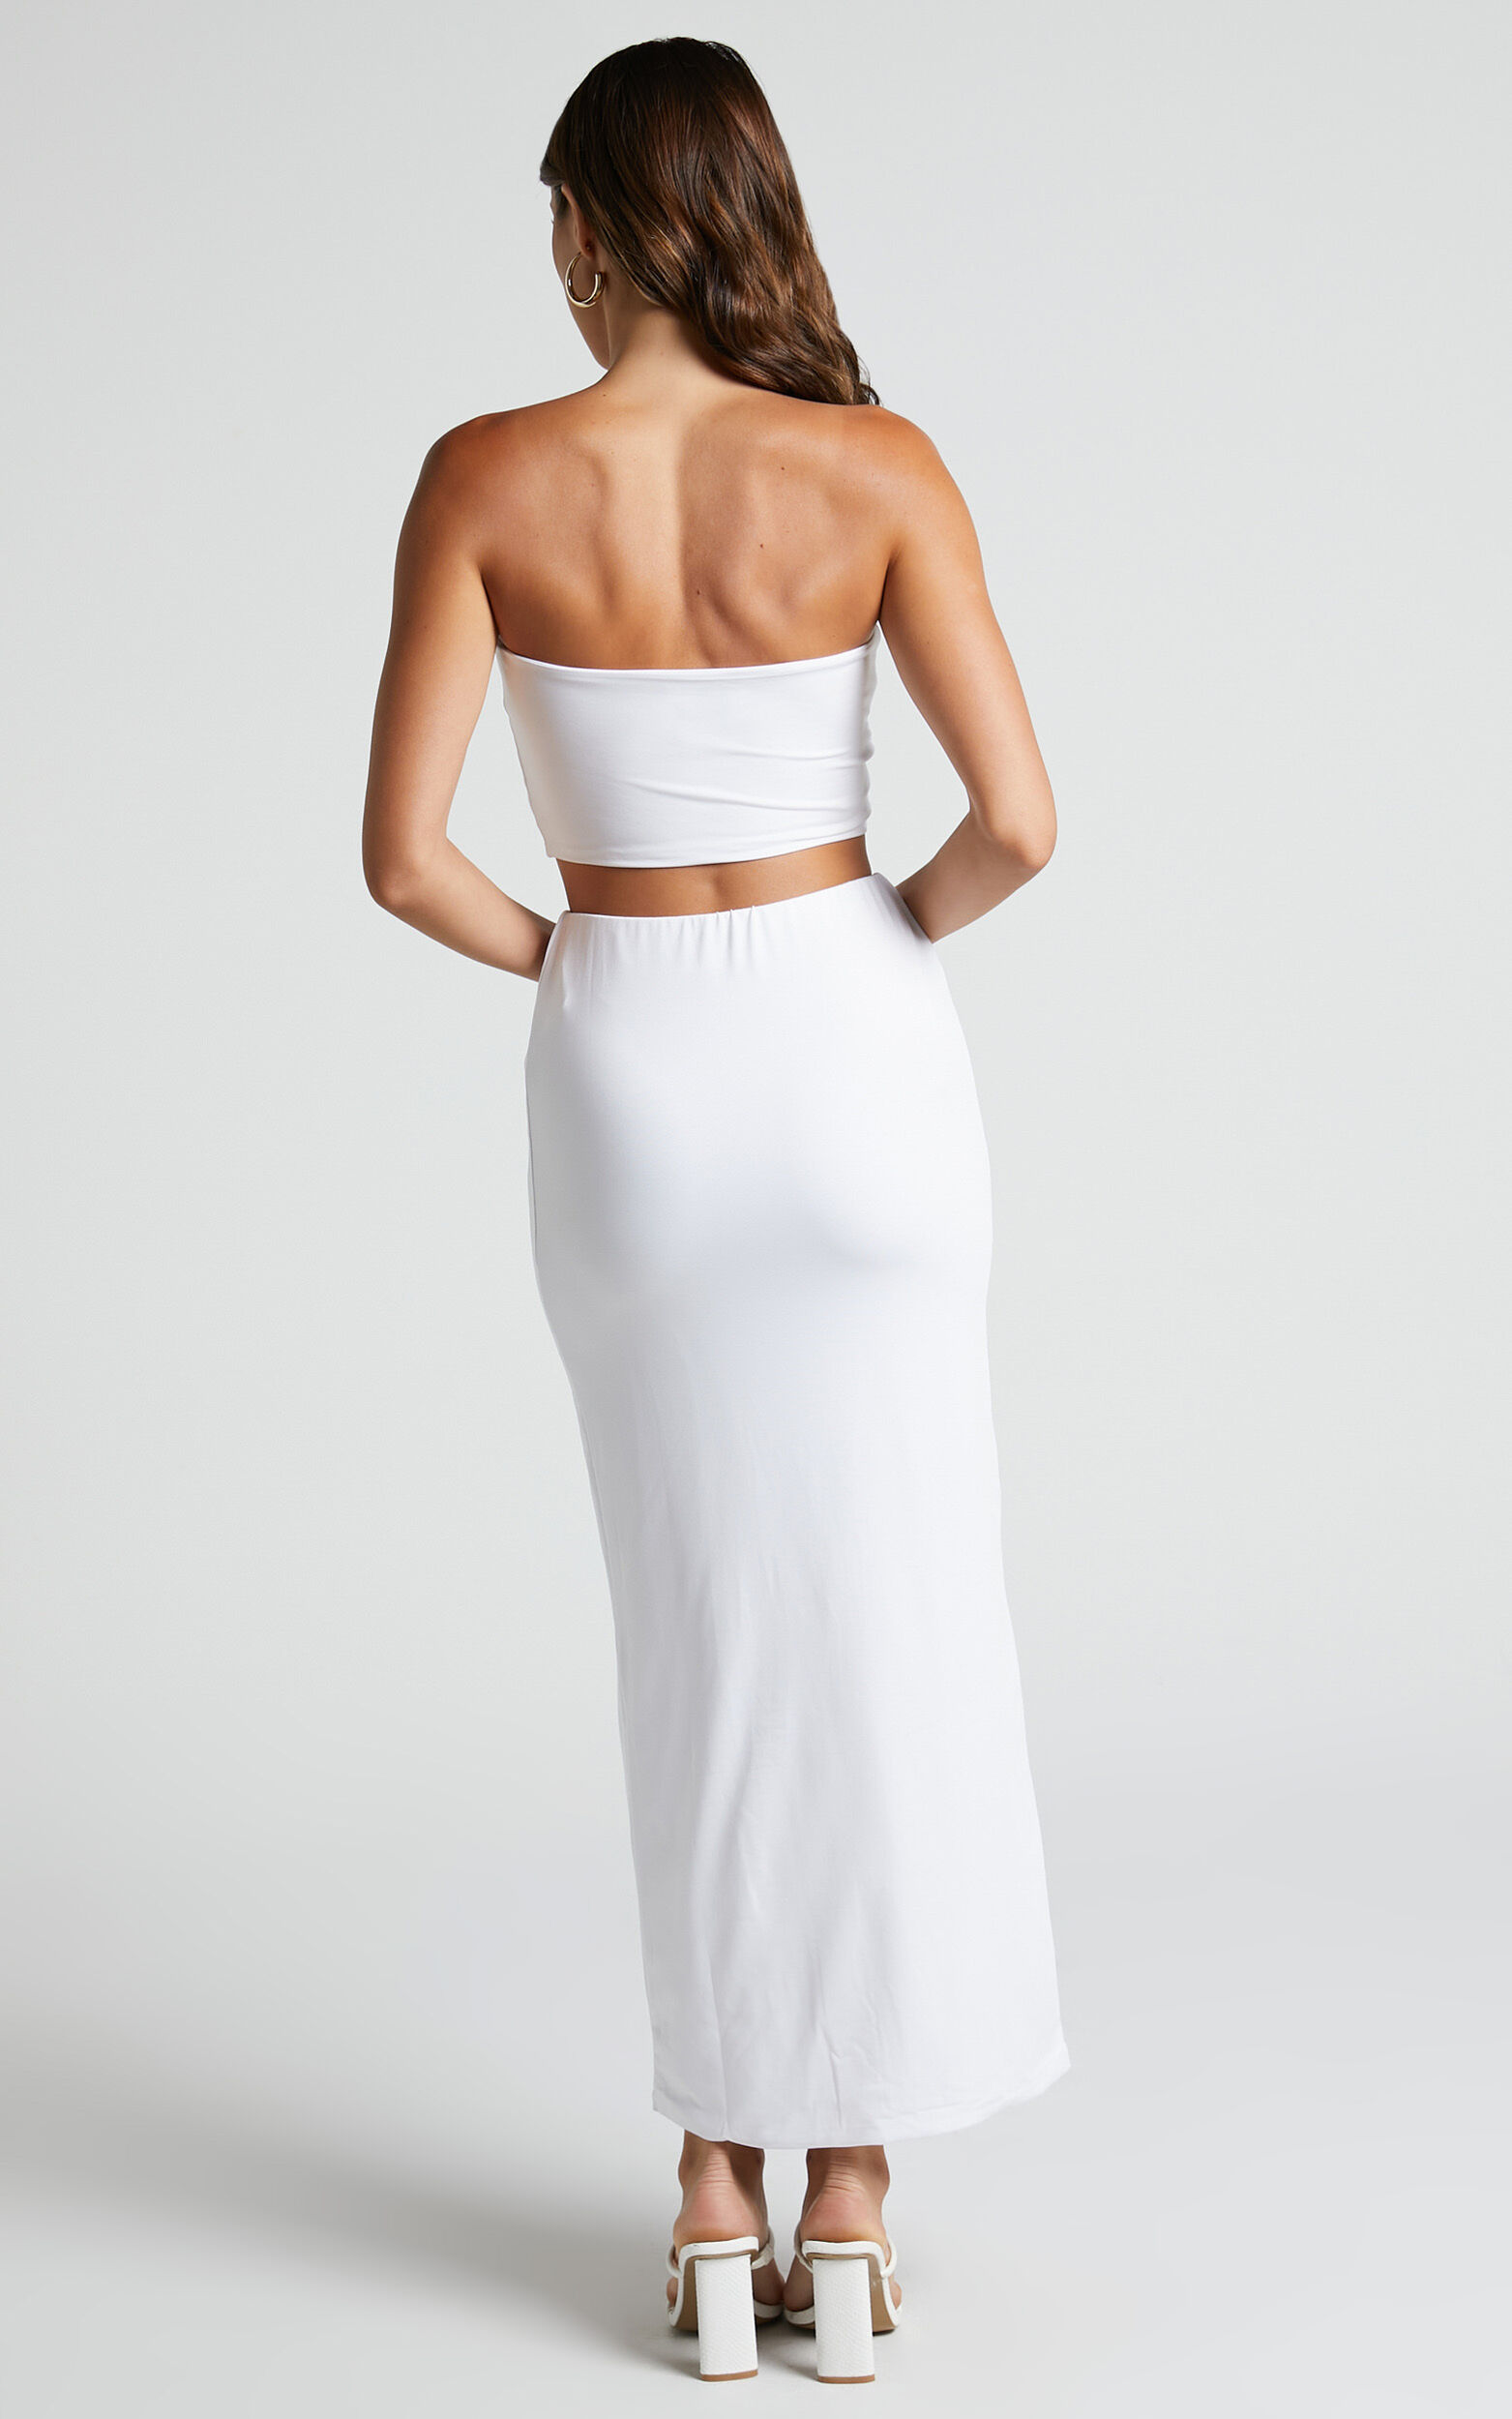 Khirara Two Piece Set - Strapless Bandeau Crop Top and Mini Skirt